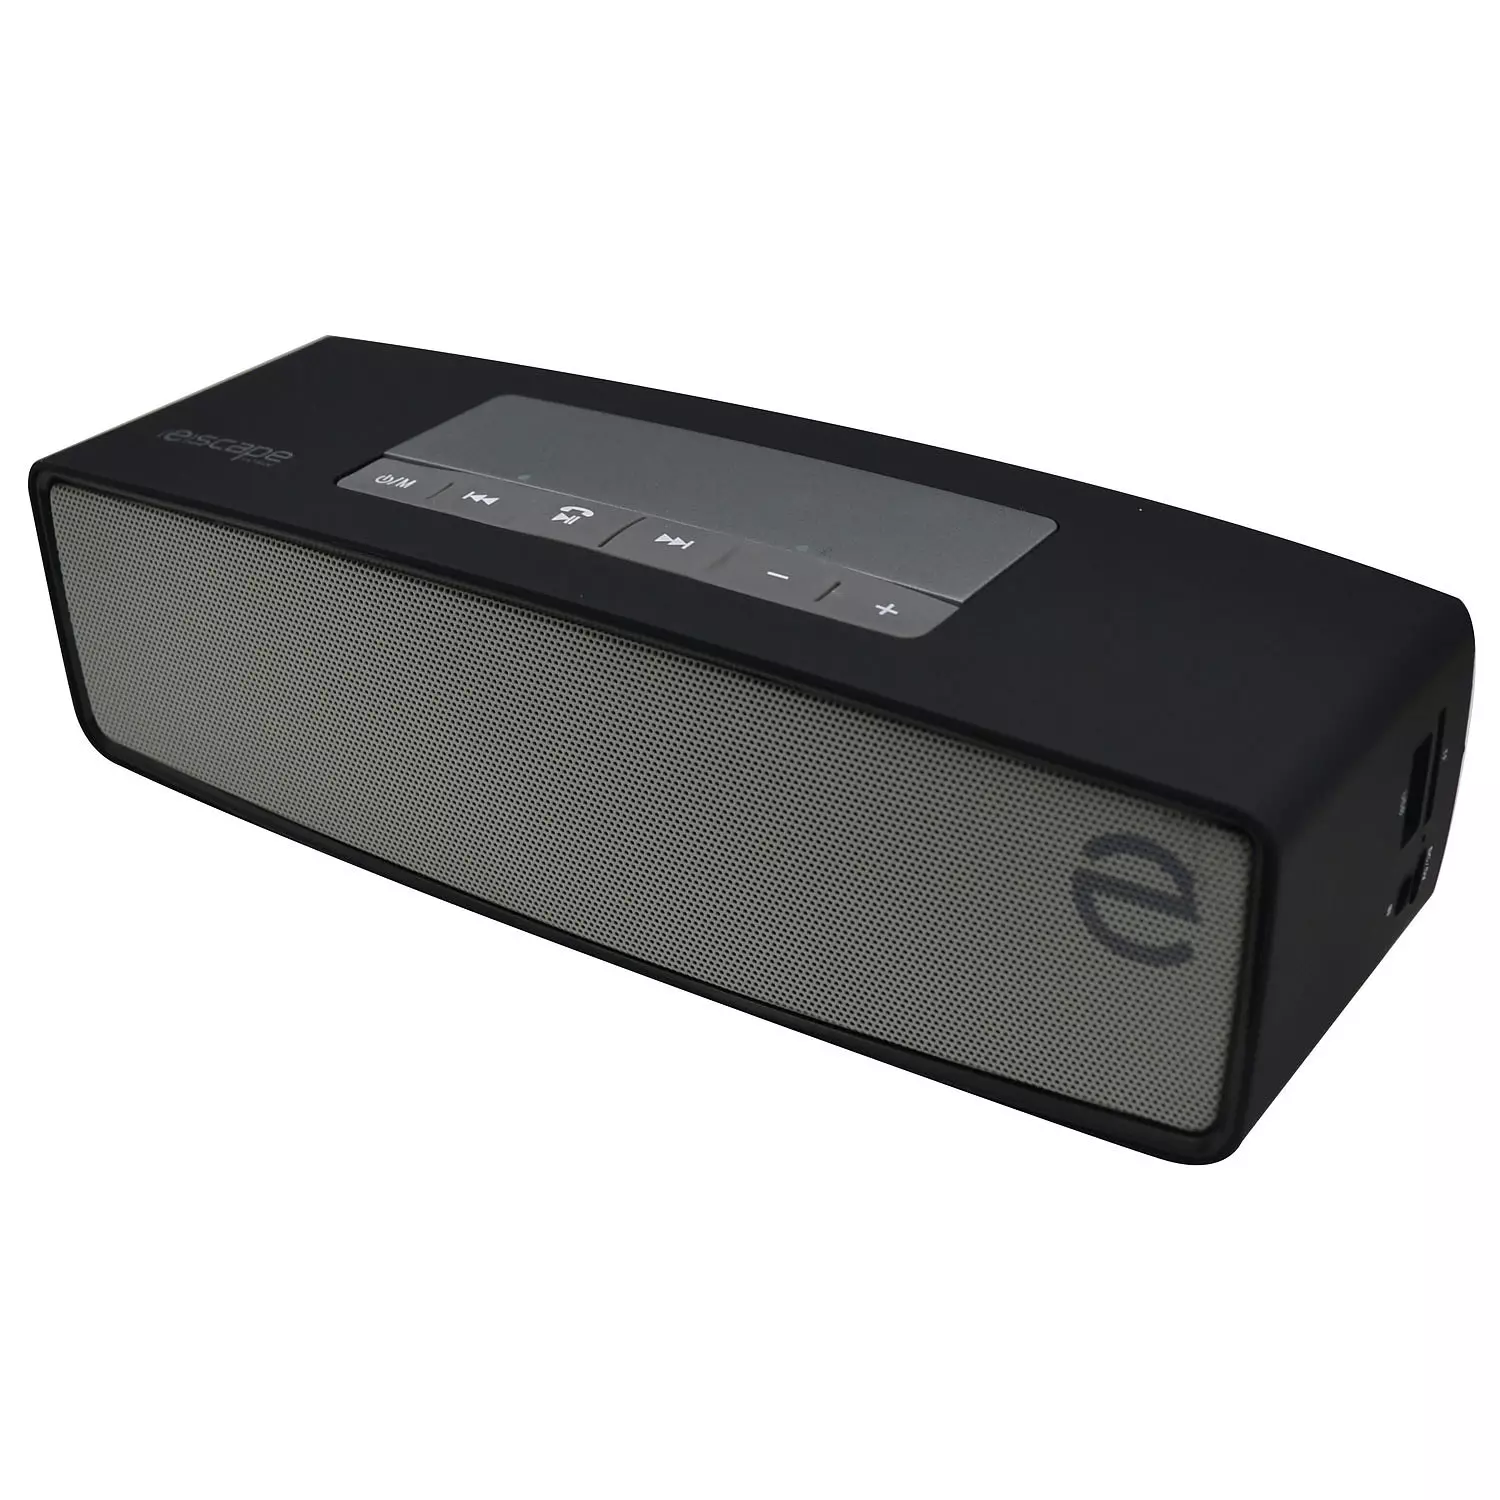 Escape - Hands-free stereo bluetooth speaker with FM radio